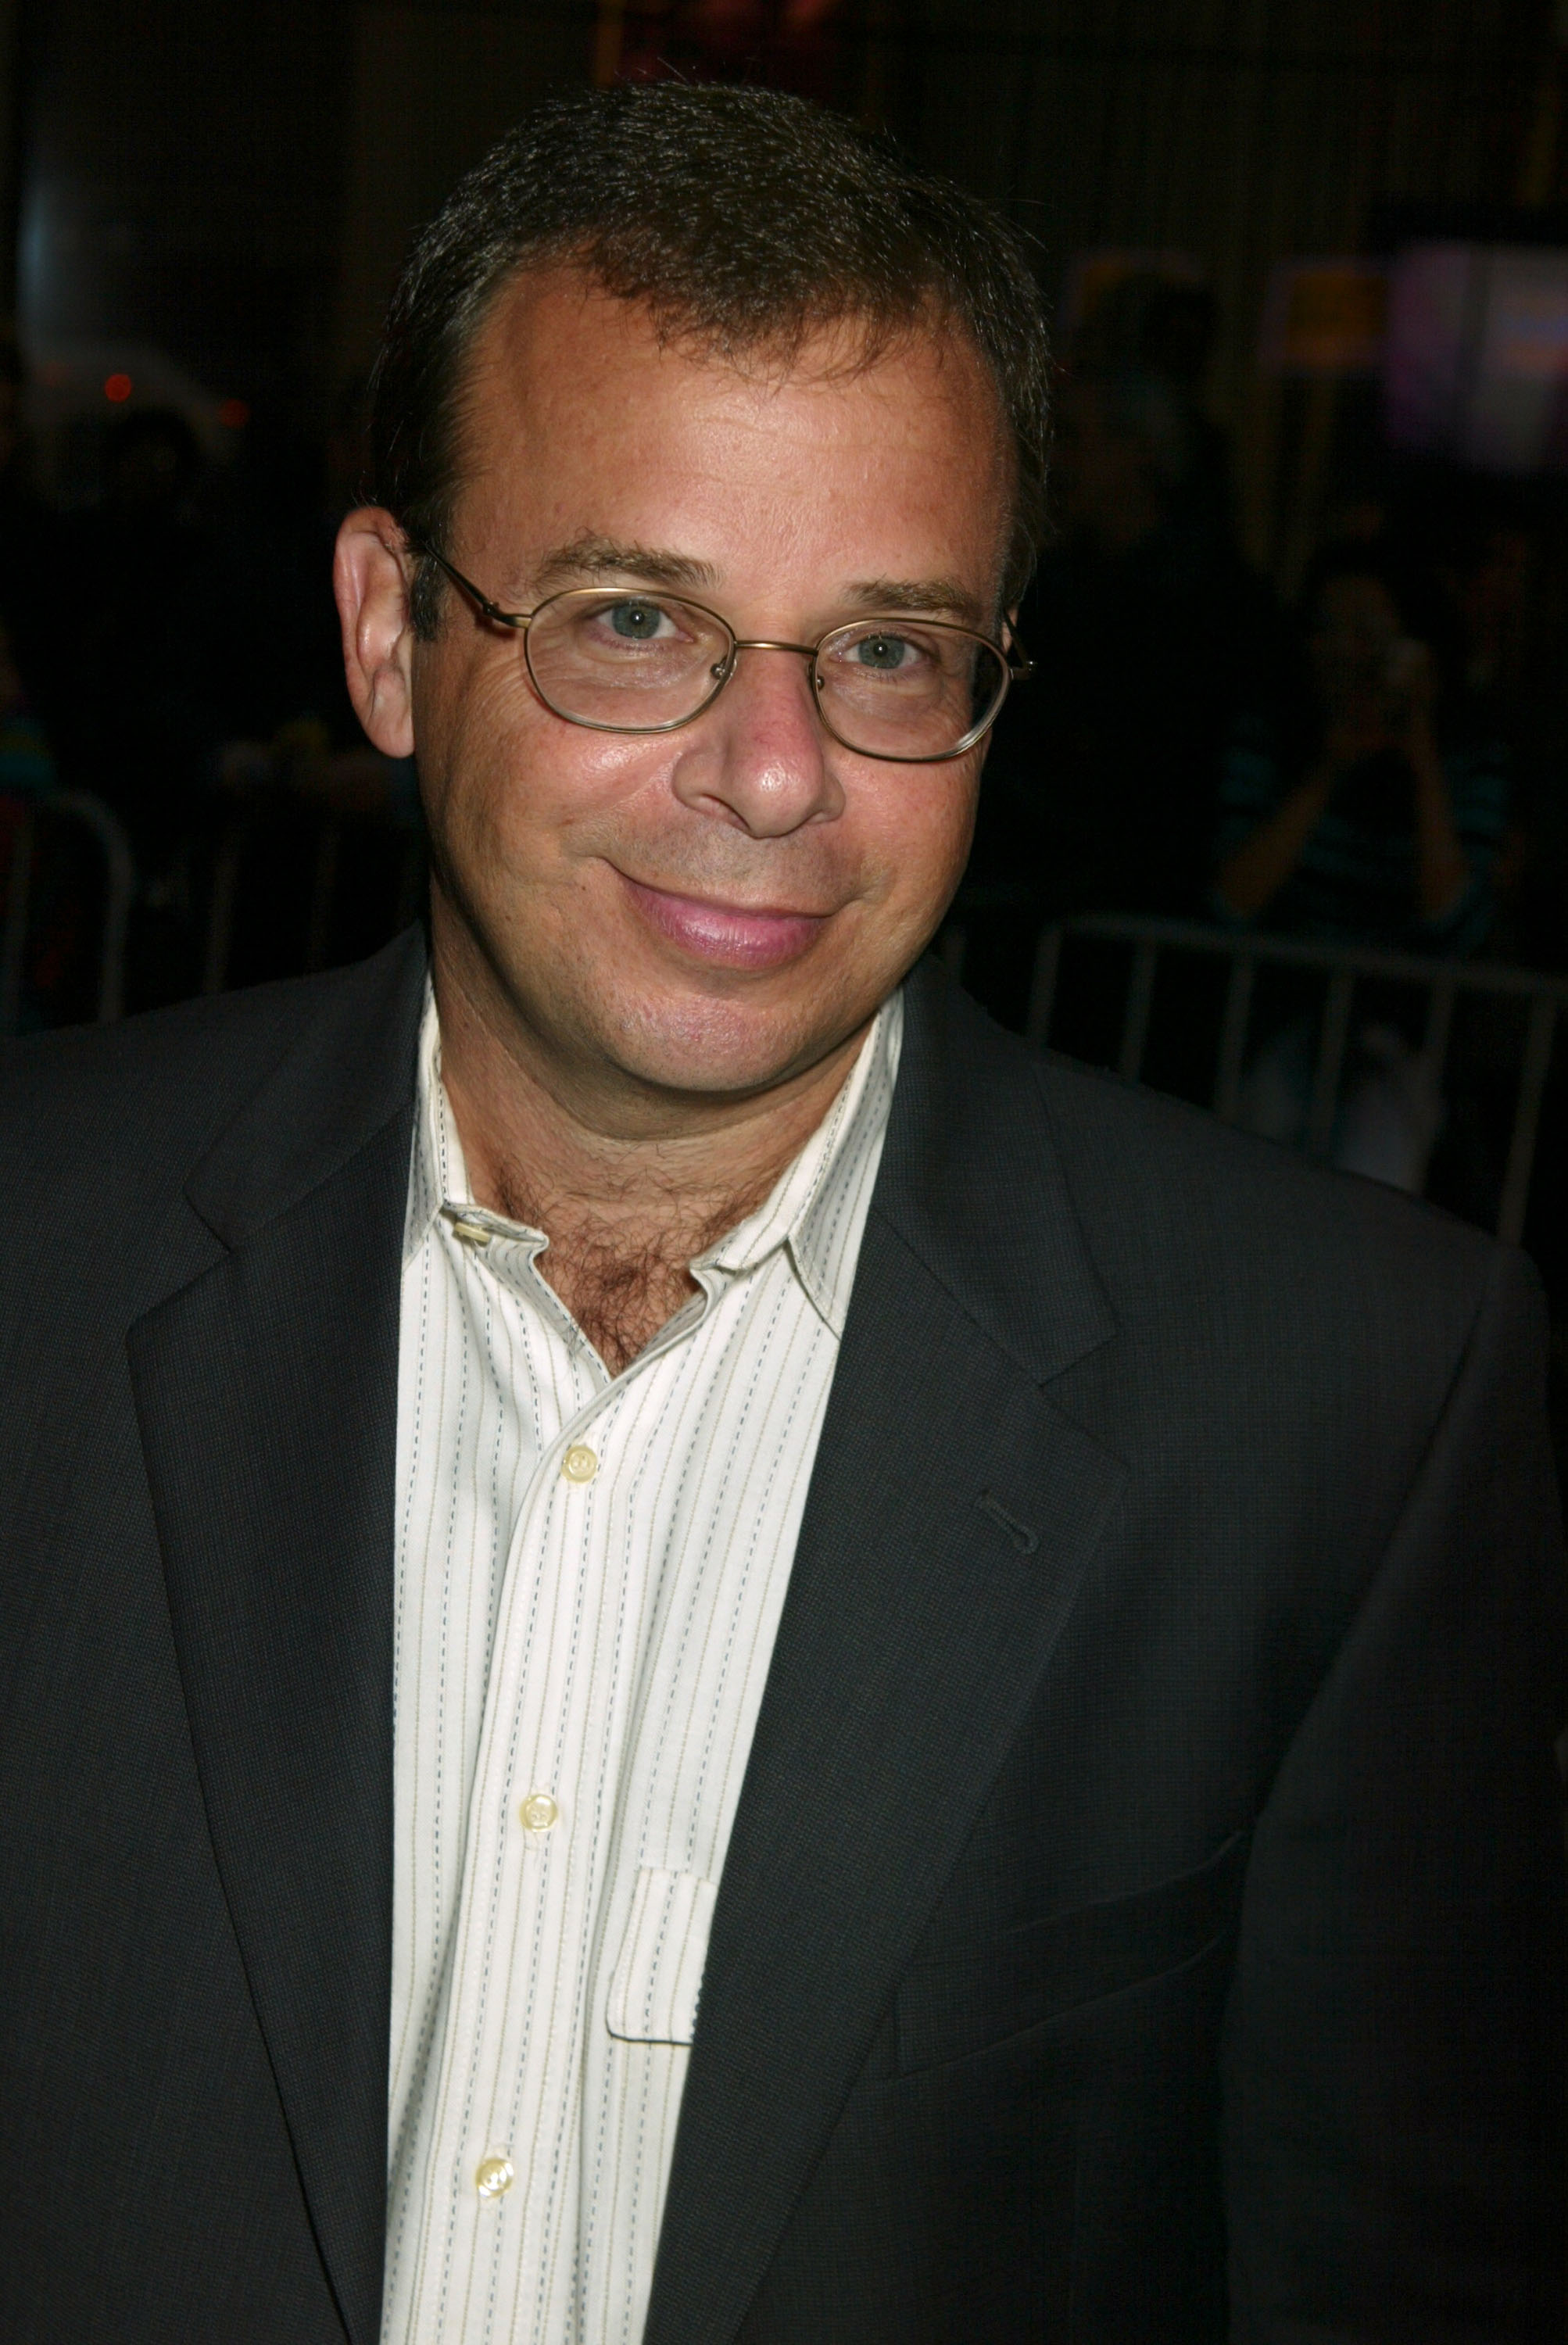 Rick Moranis at the "Brother Bear" premiere and after-party in New York City | Source: Getty Images